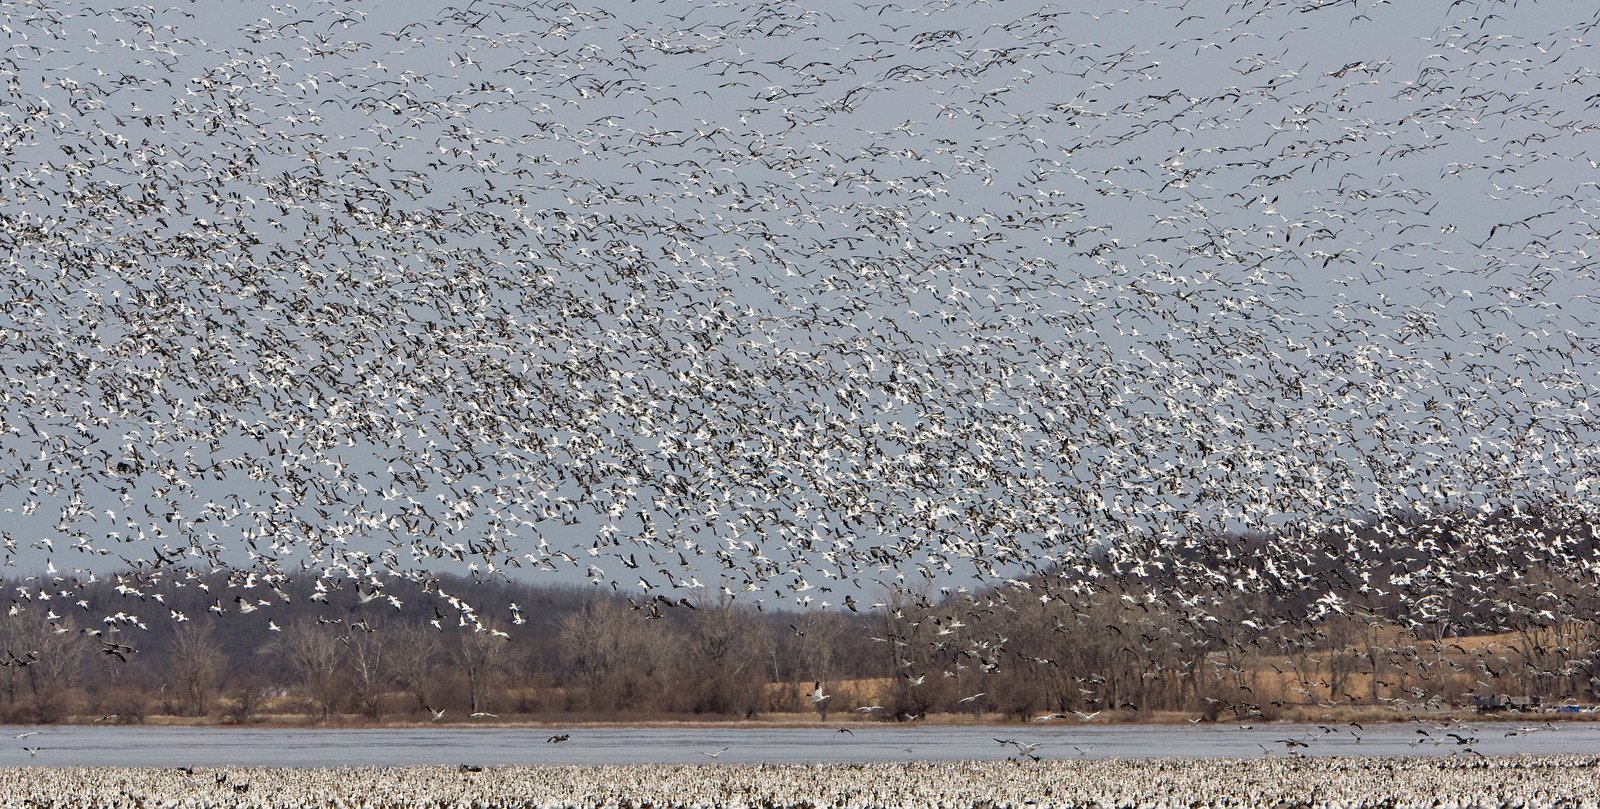 Photograph of Loess Bluffs National Wildlife Refuge on the Missouri River. In the foreground, snow geese float on the water and fly in the air. In the background, loess hills can be see near the shore.